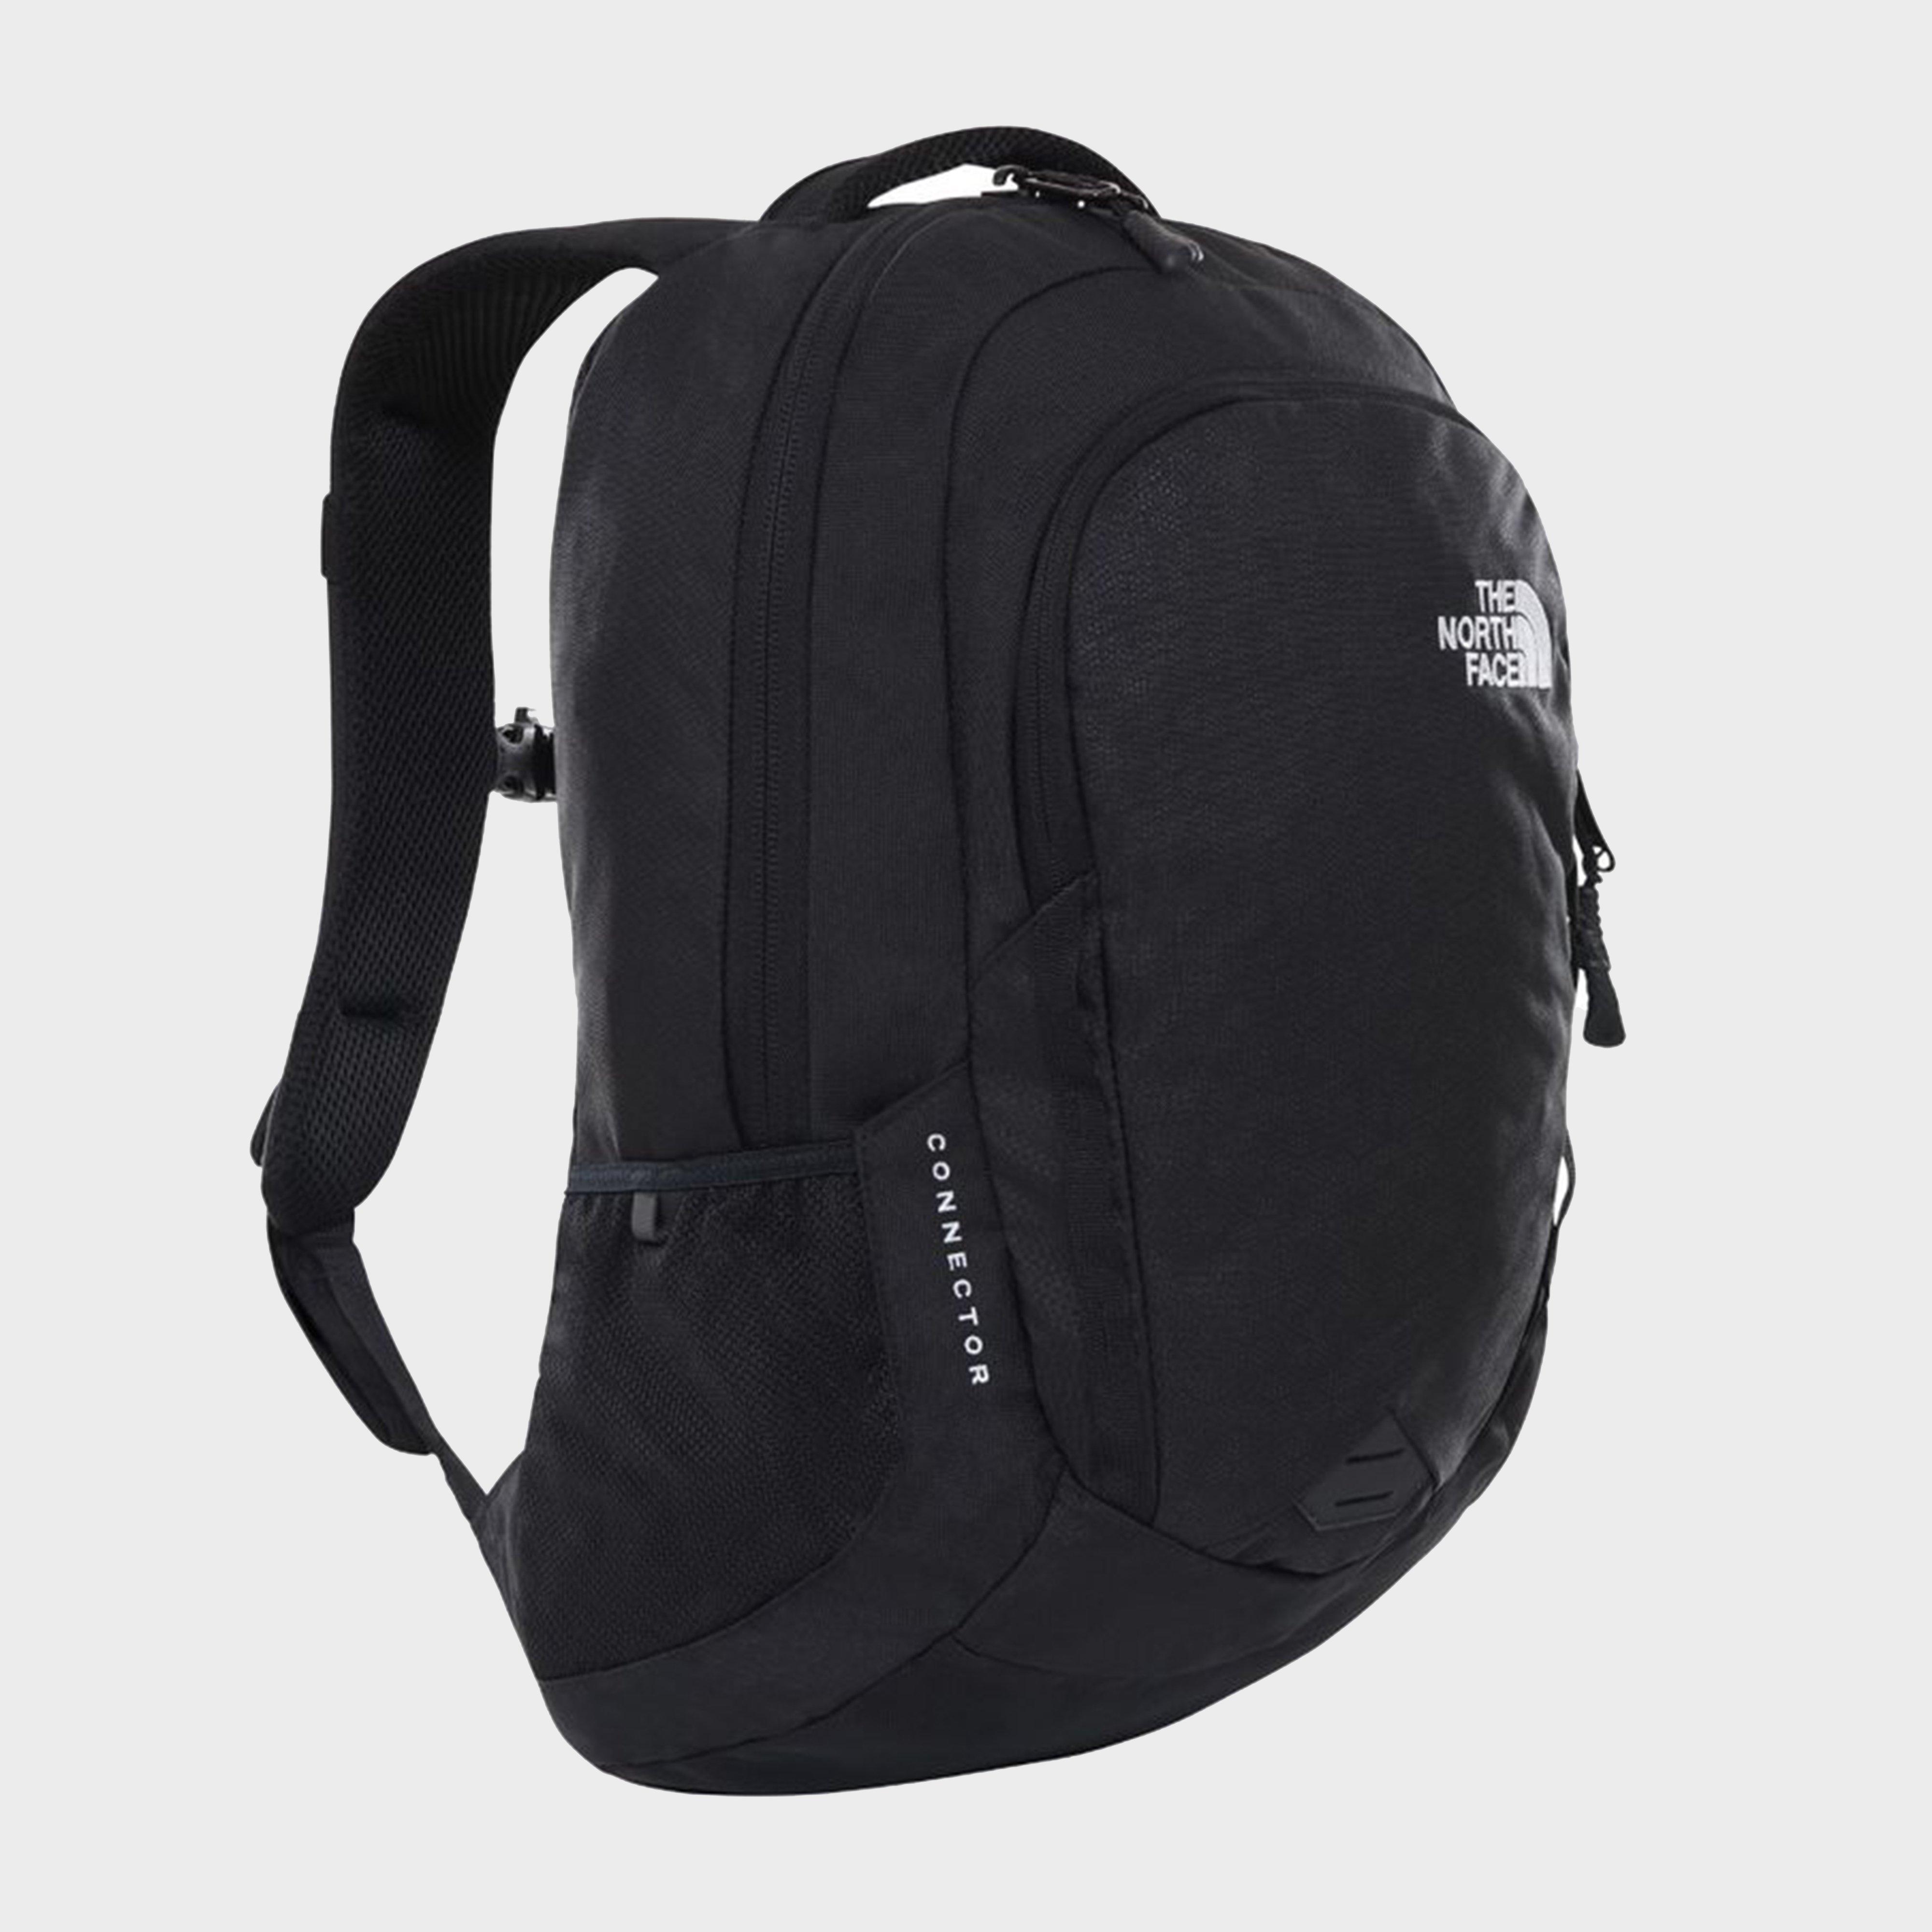  The North Face Connector Daysack